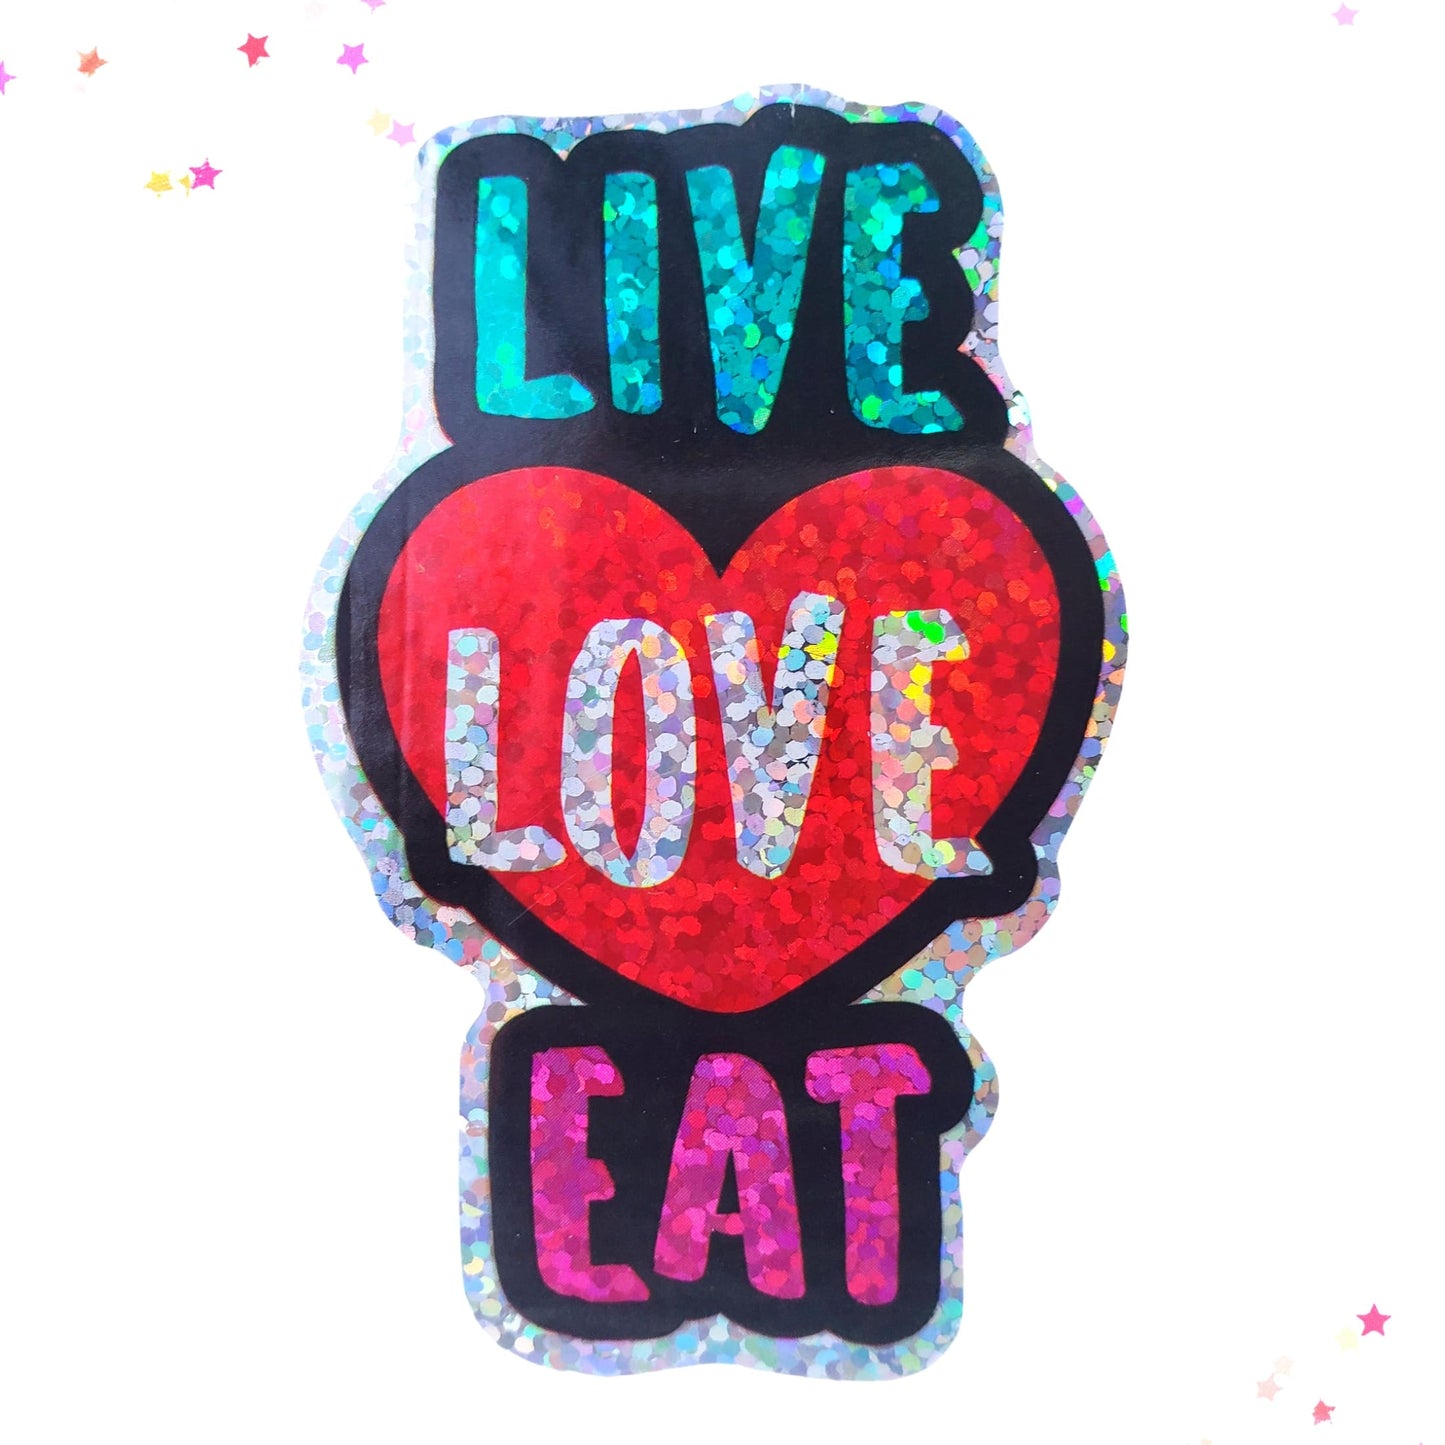 Premium Sticker - Sparkly Holographic Glitter Live Love Eat from Confetti Kitty, Only 2.00